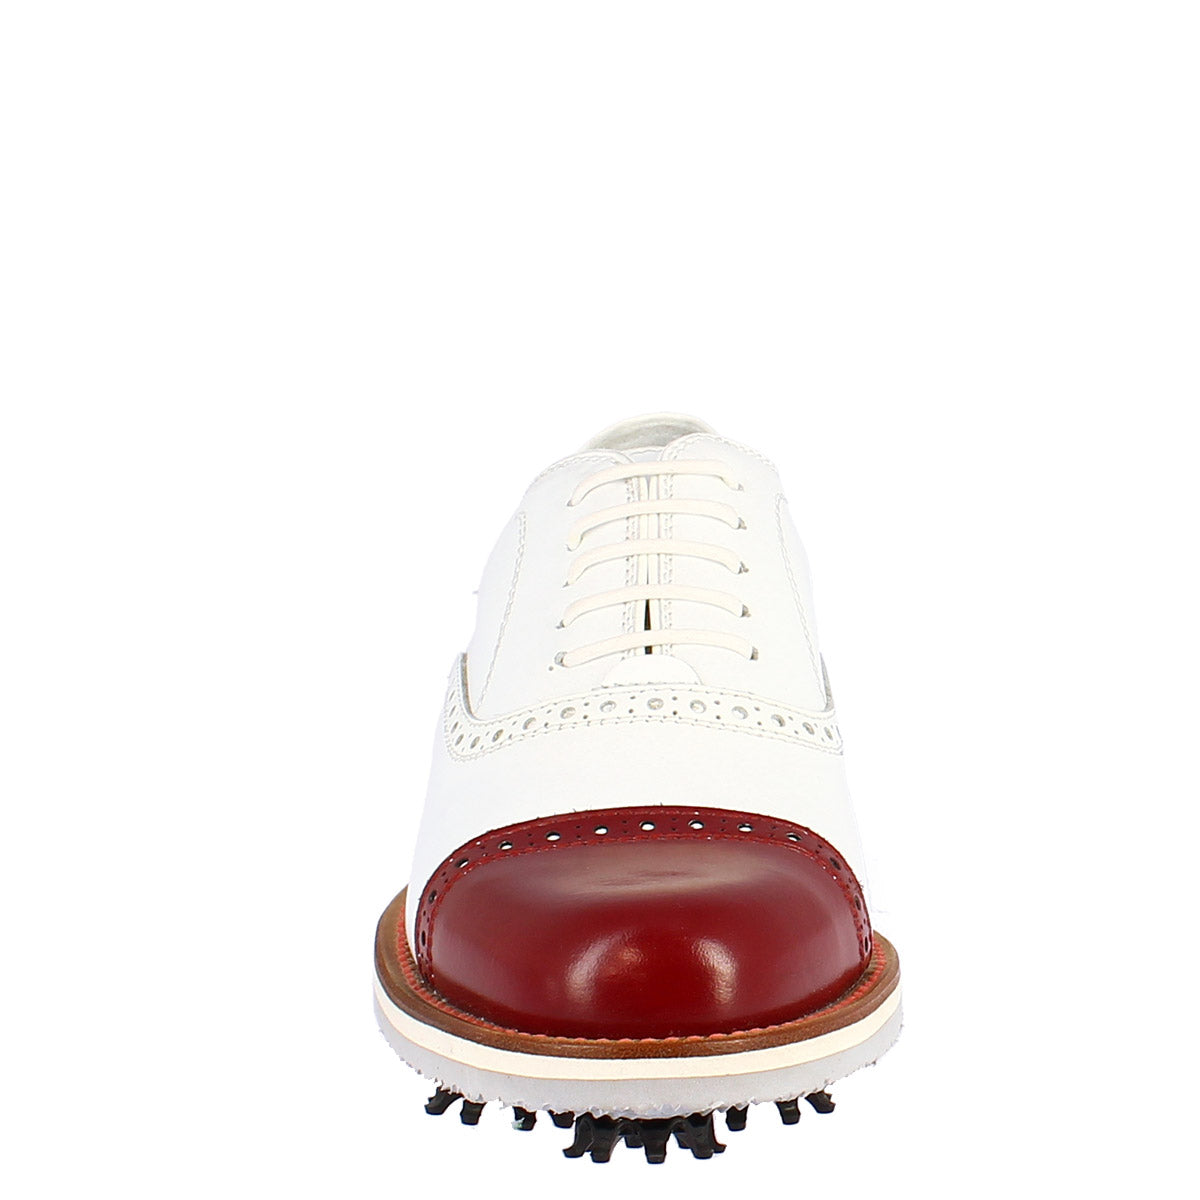 Handcrafted women's golf shoes in white leather with red toe cap